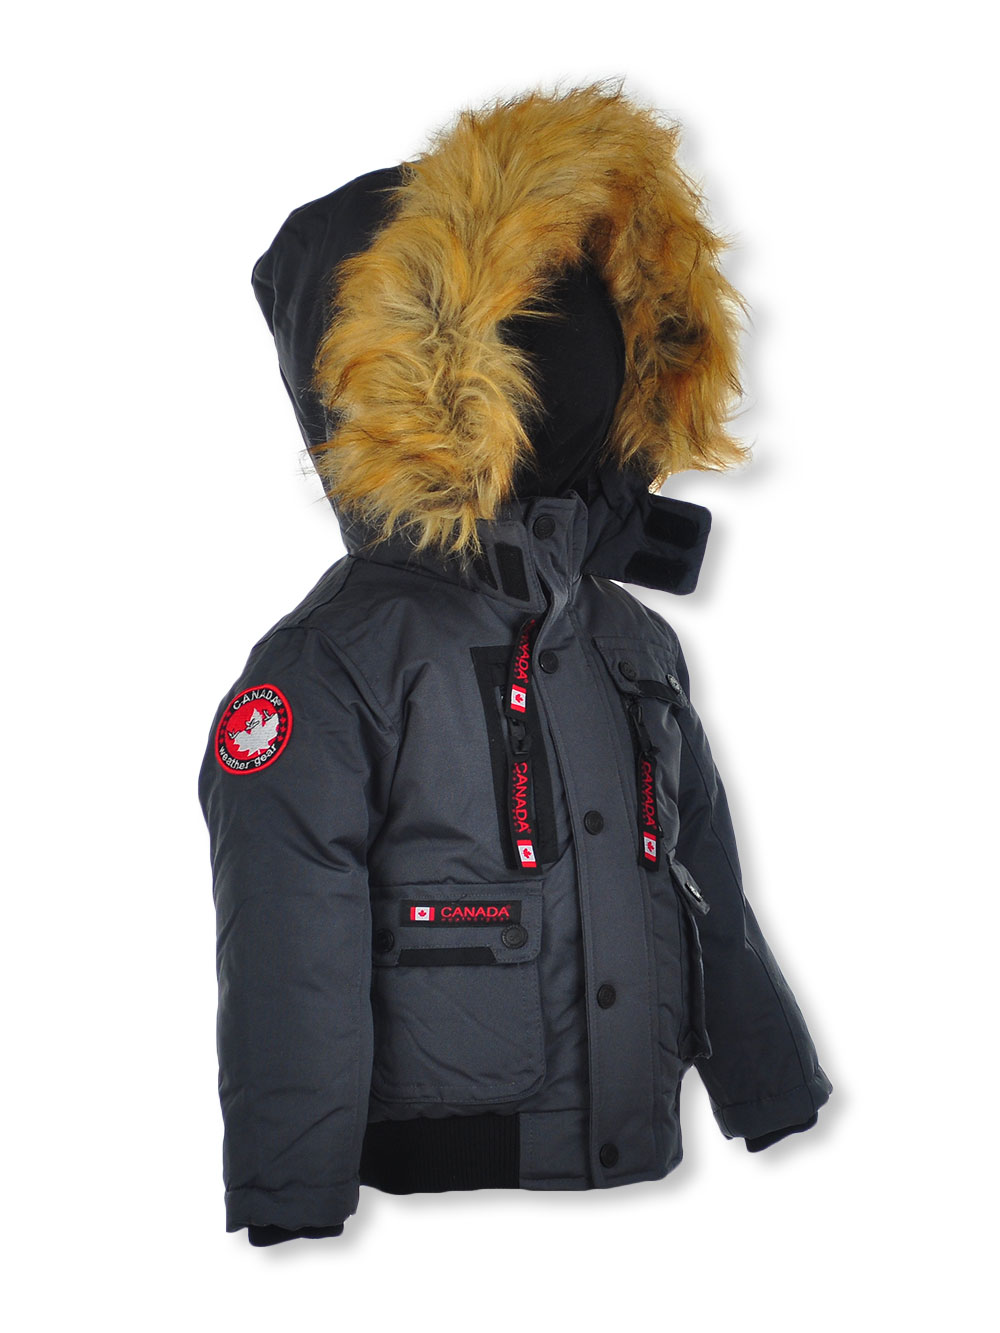 Canada Weather Gear Boys Winter Coat Available in Multiple Colors 